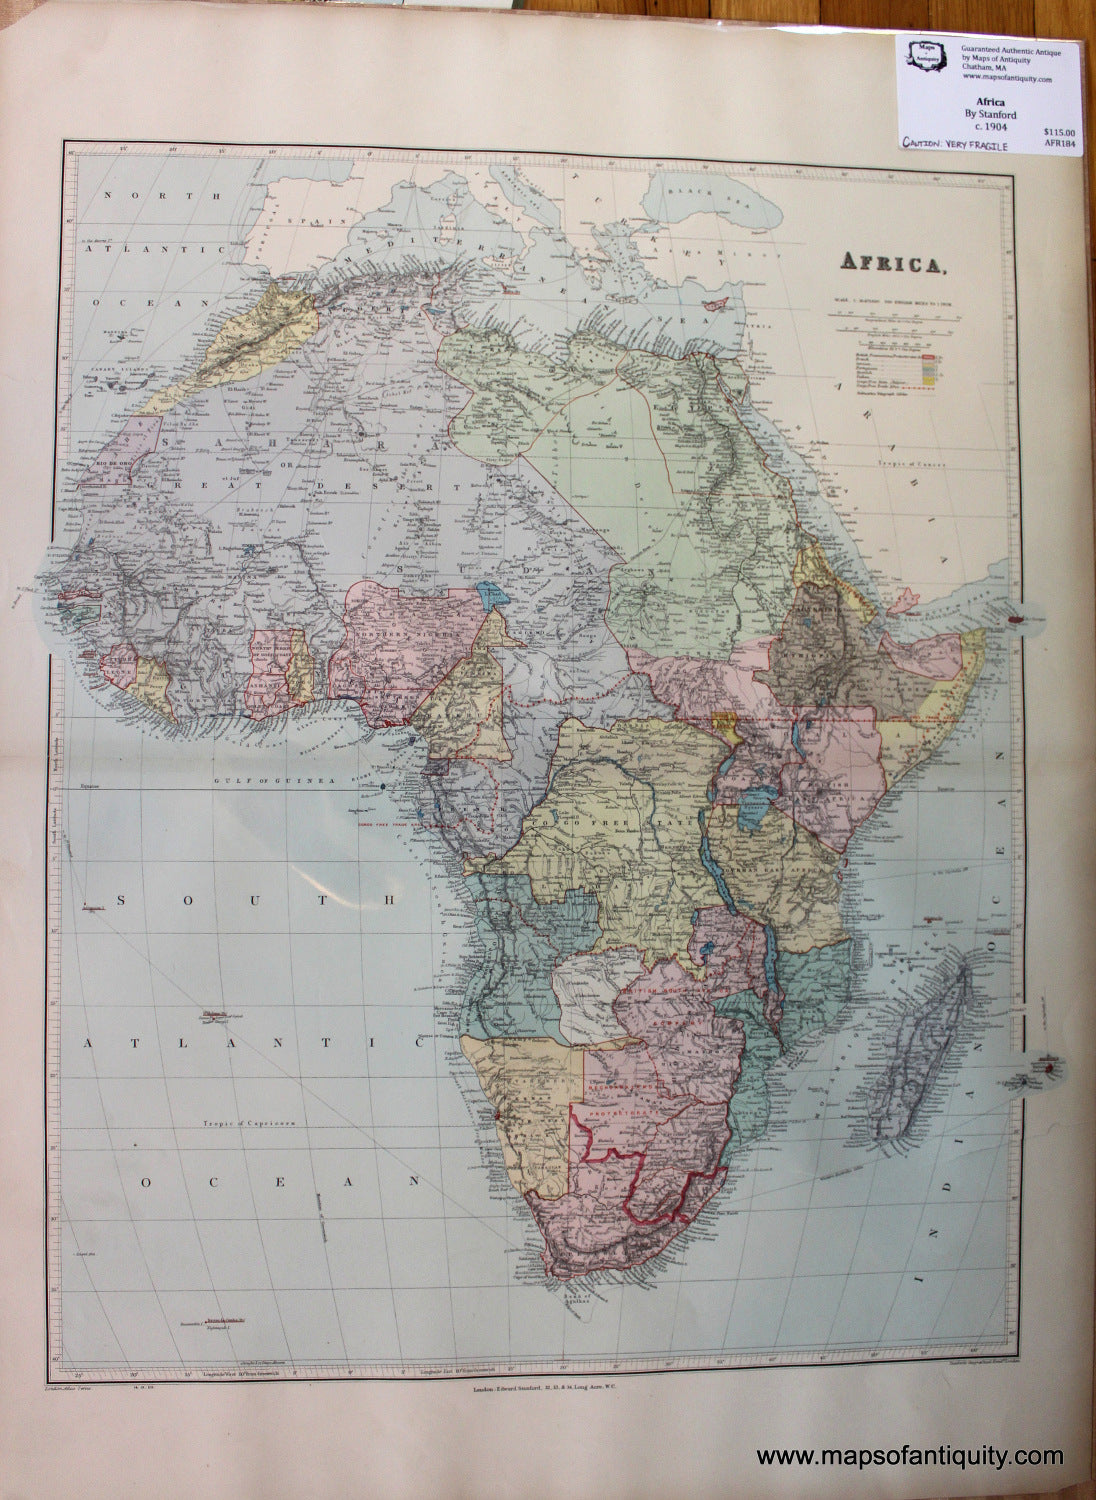 Antique-Printed-Color-Map-Africa-******-Africa-Africa-General-c.-1904-Stanford-Maps-Of-Antiquity